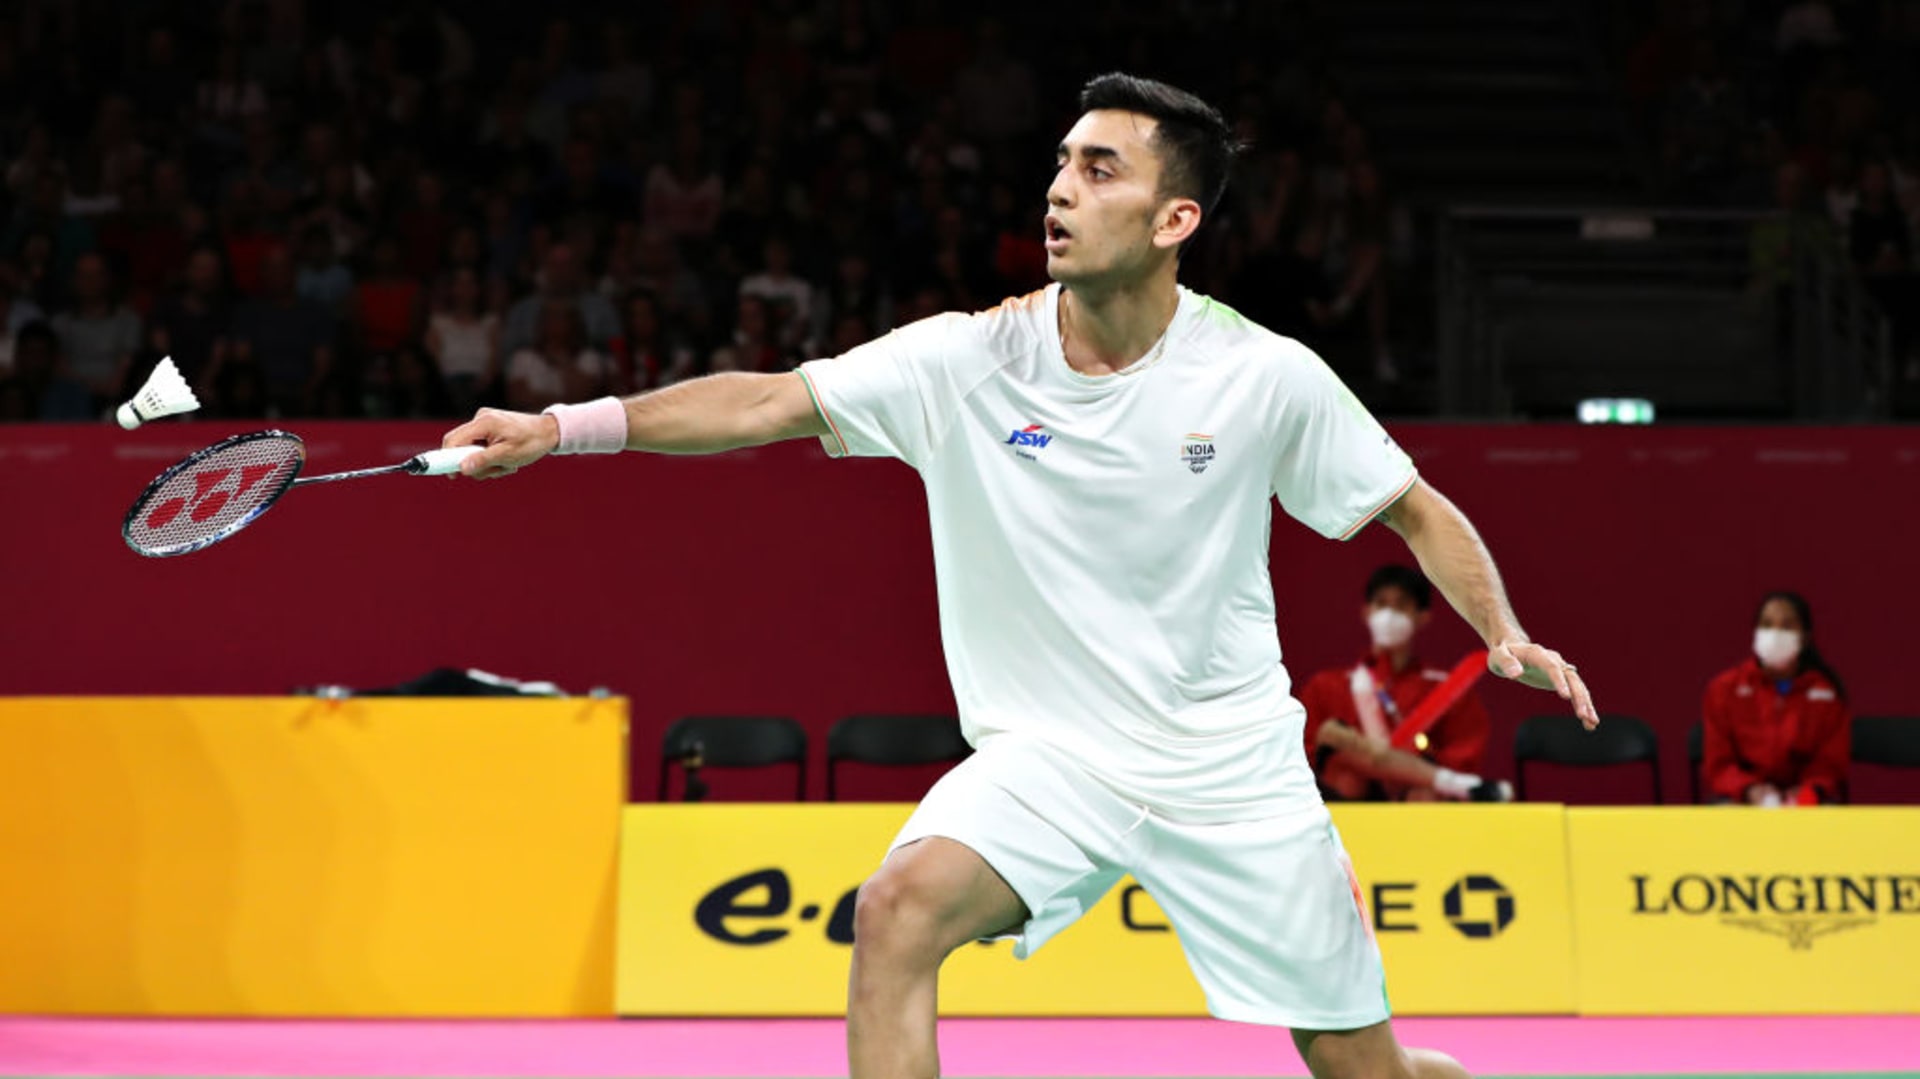 watch french open badminton live